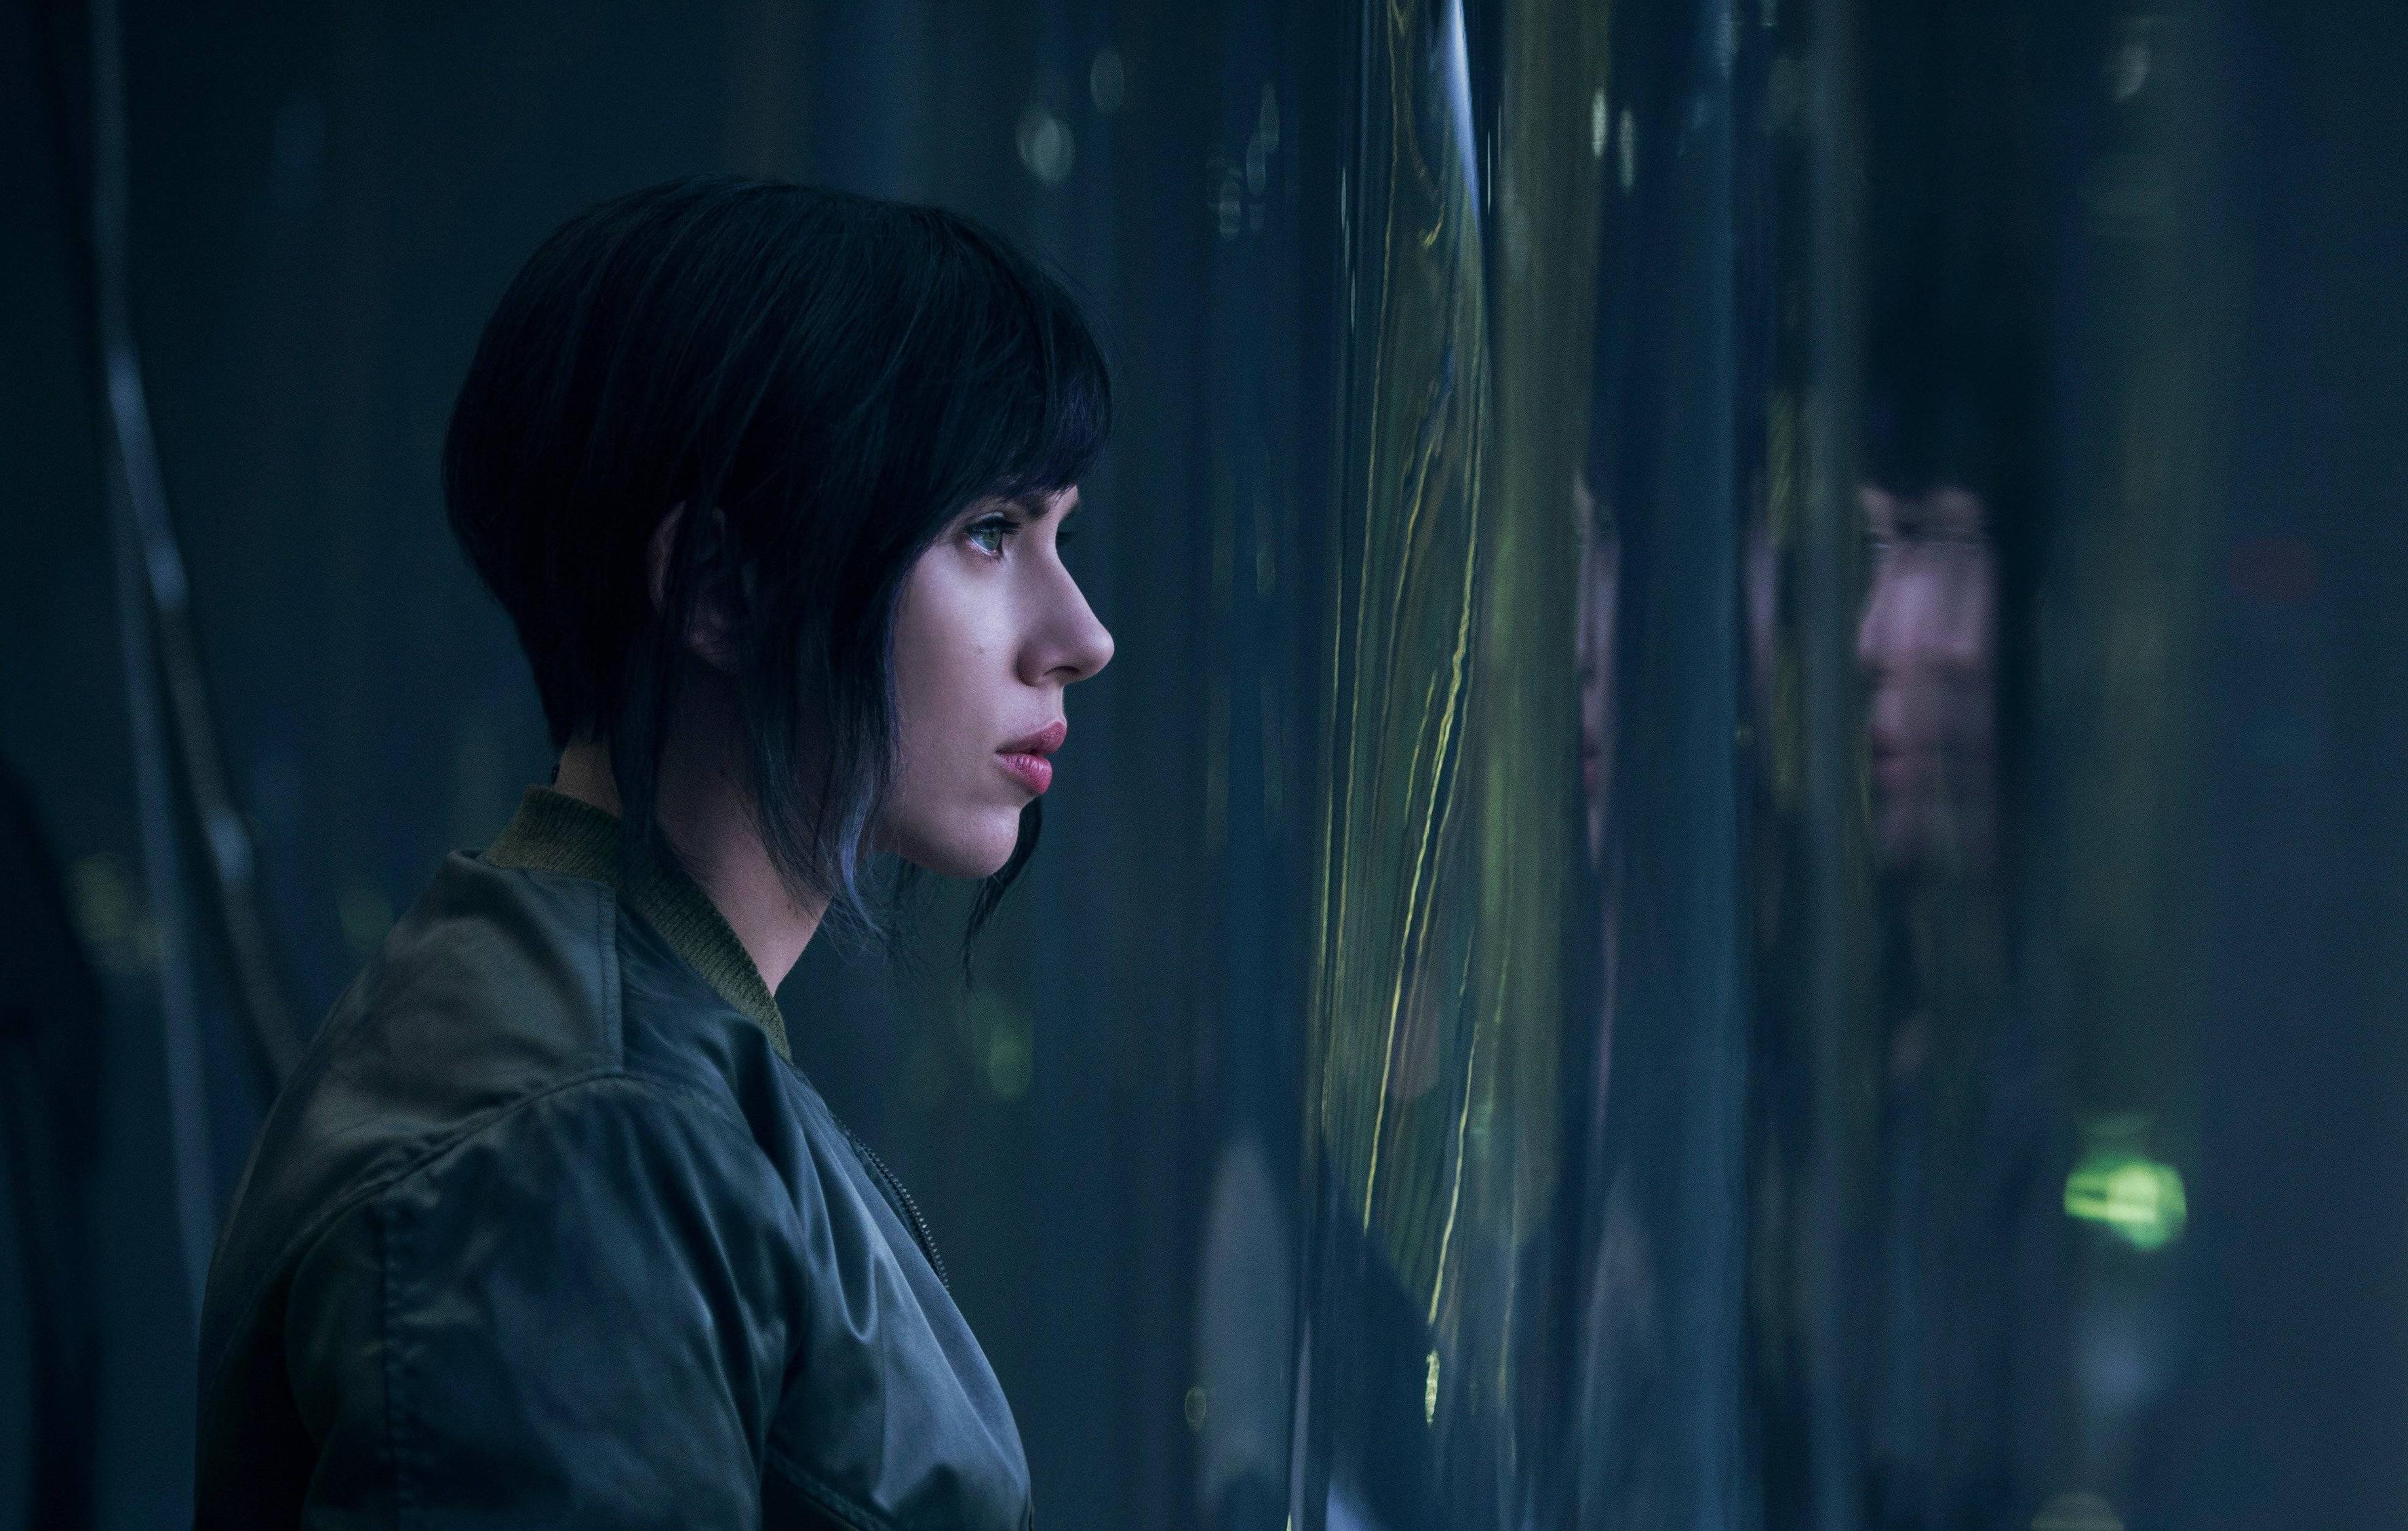  Scarlett Johansson plays the Major in Ghost in the Shell from Paramount Pictures and DreamWorks Pictures in Theaters March 31, 2017. 